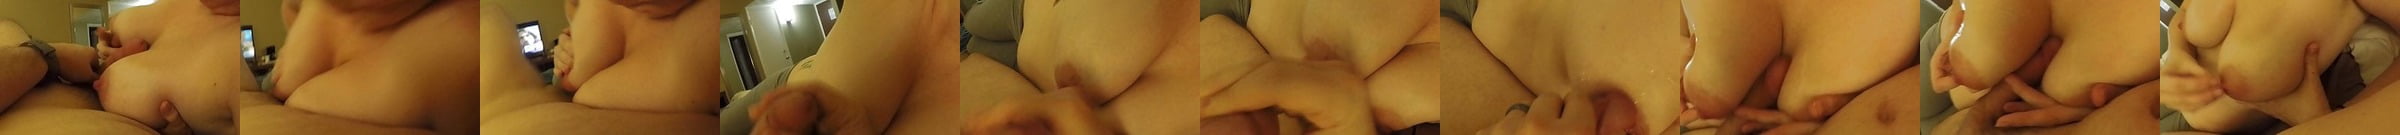 Hot Cum All Over My Wifes Big Tits Free Porn 6a Xhamster Xhamster 